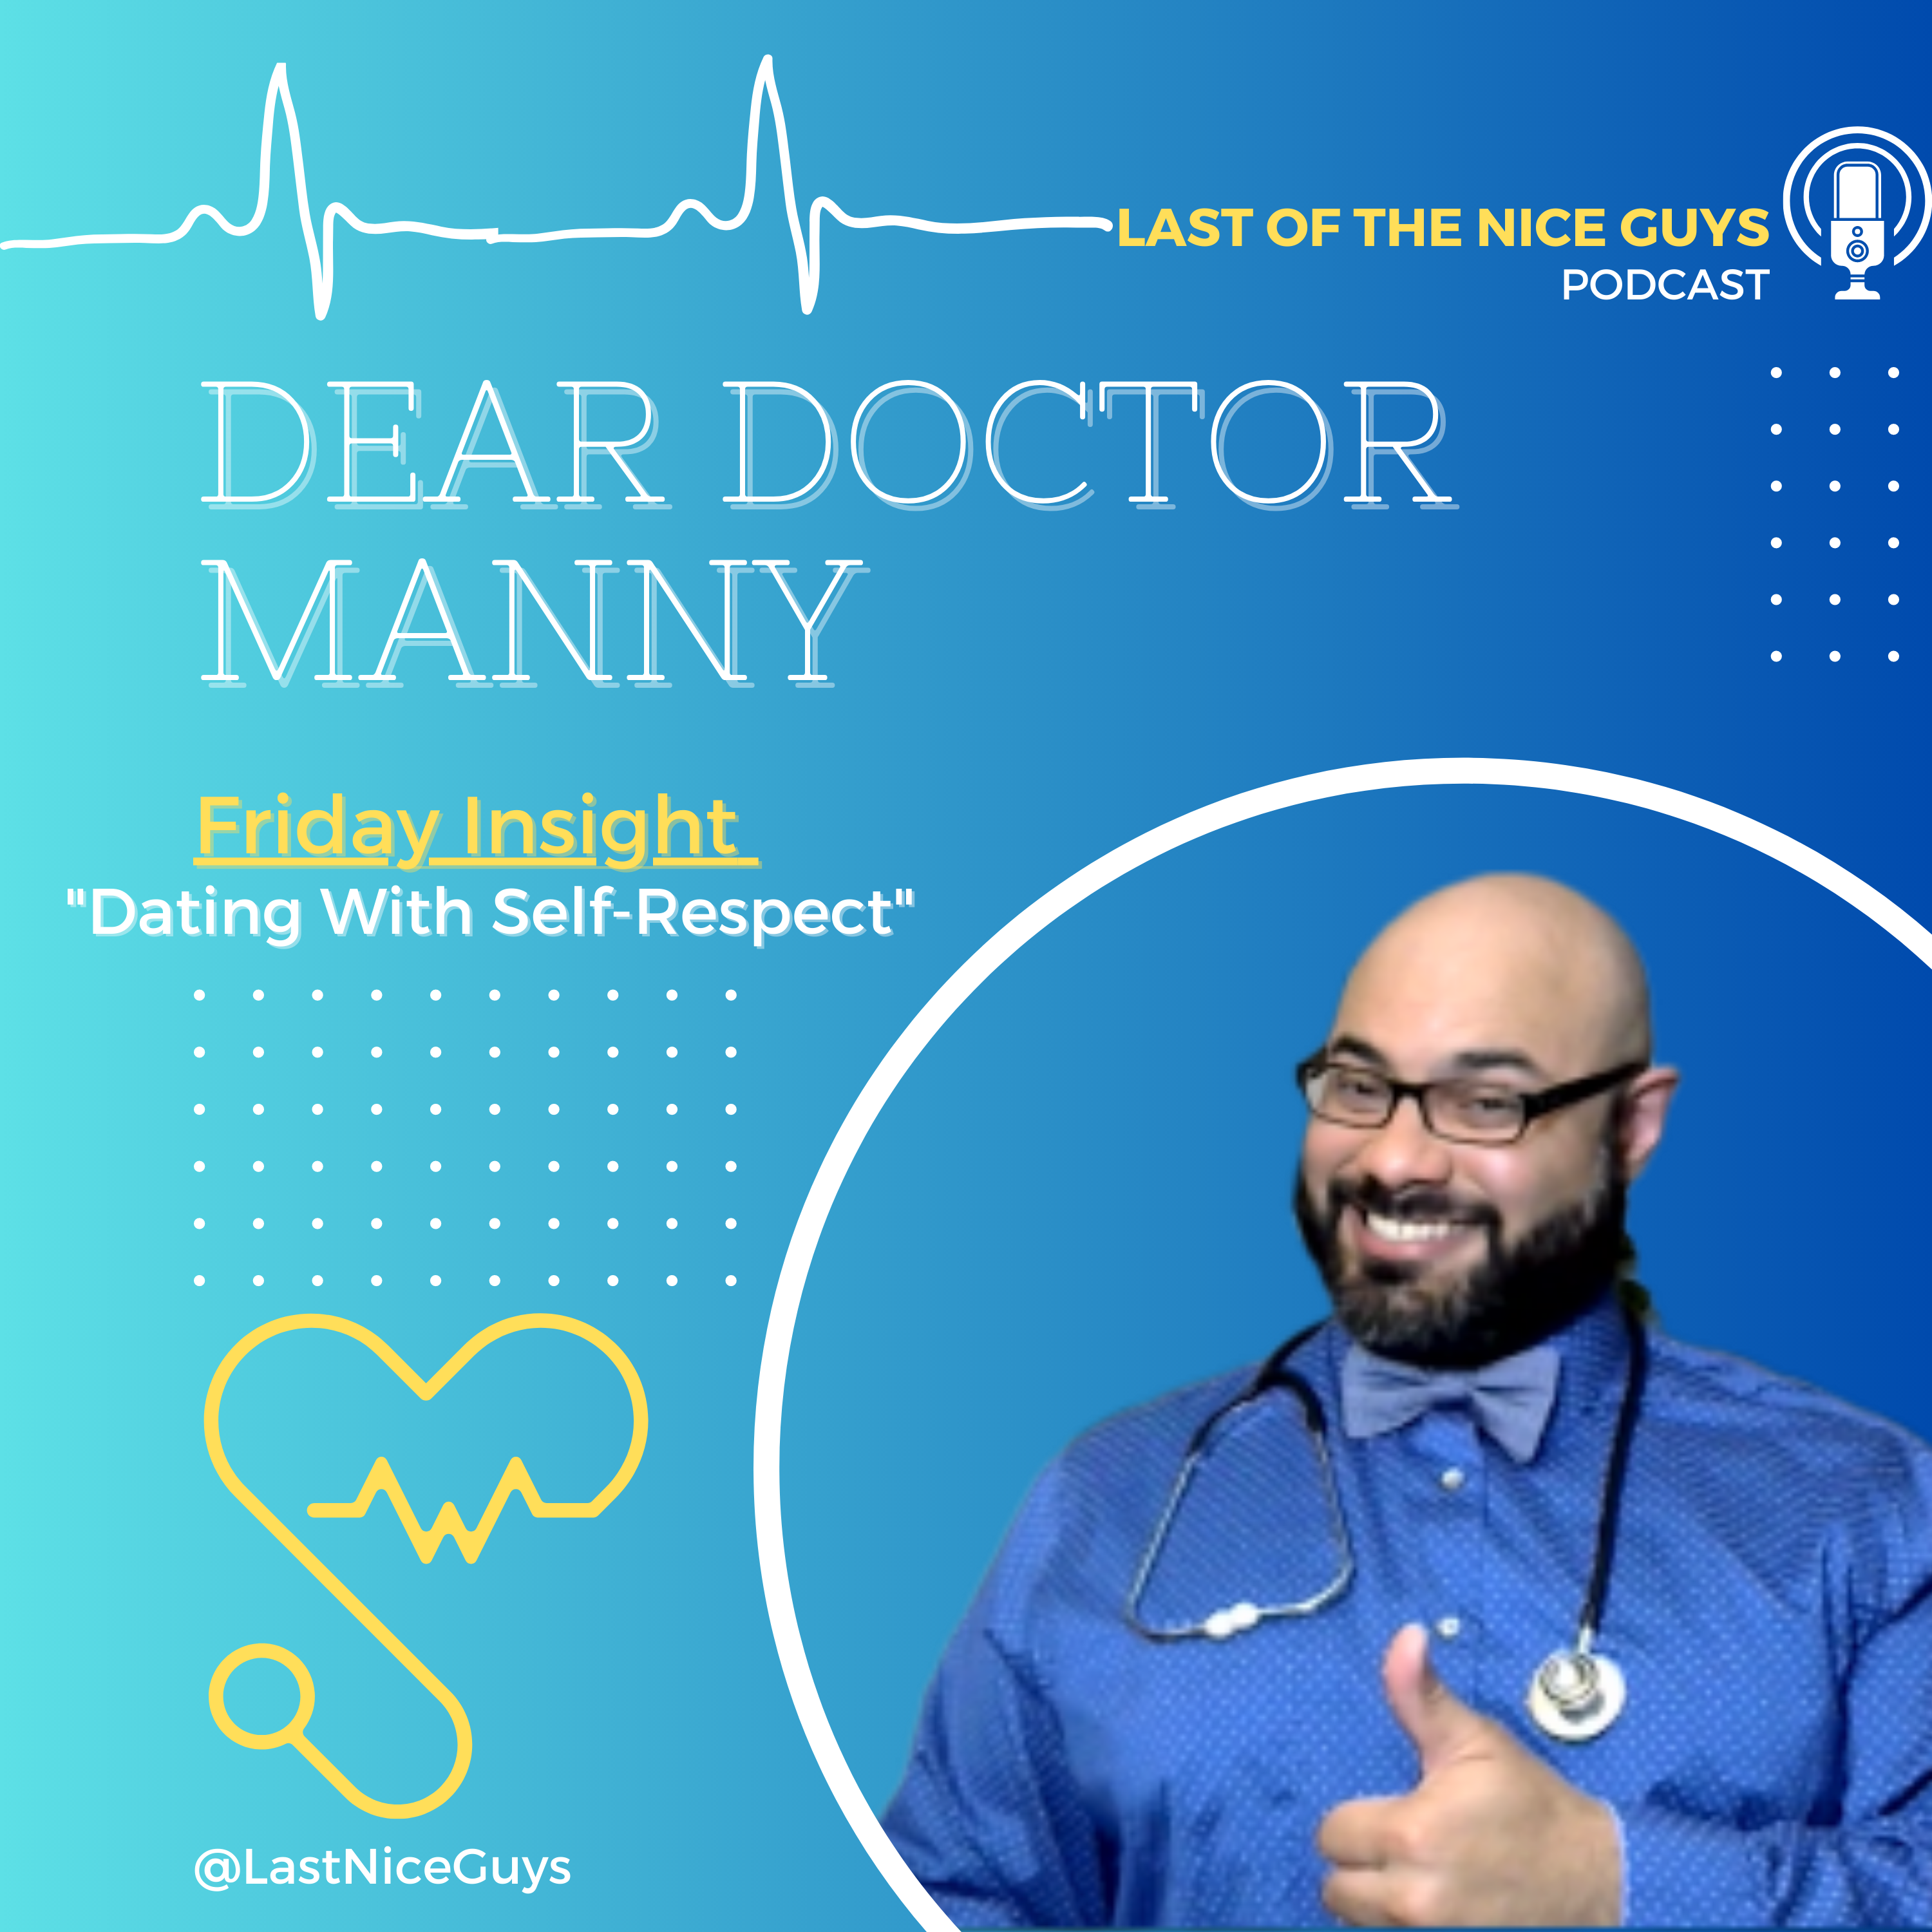 Dating With Self-Respect -  "Dear Doctor Manny" Friday Insight